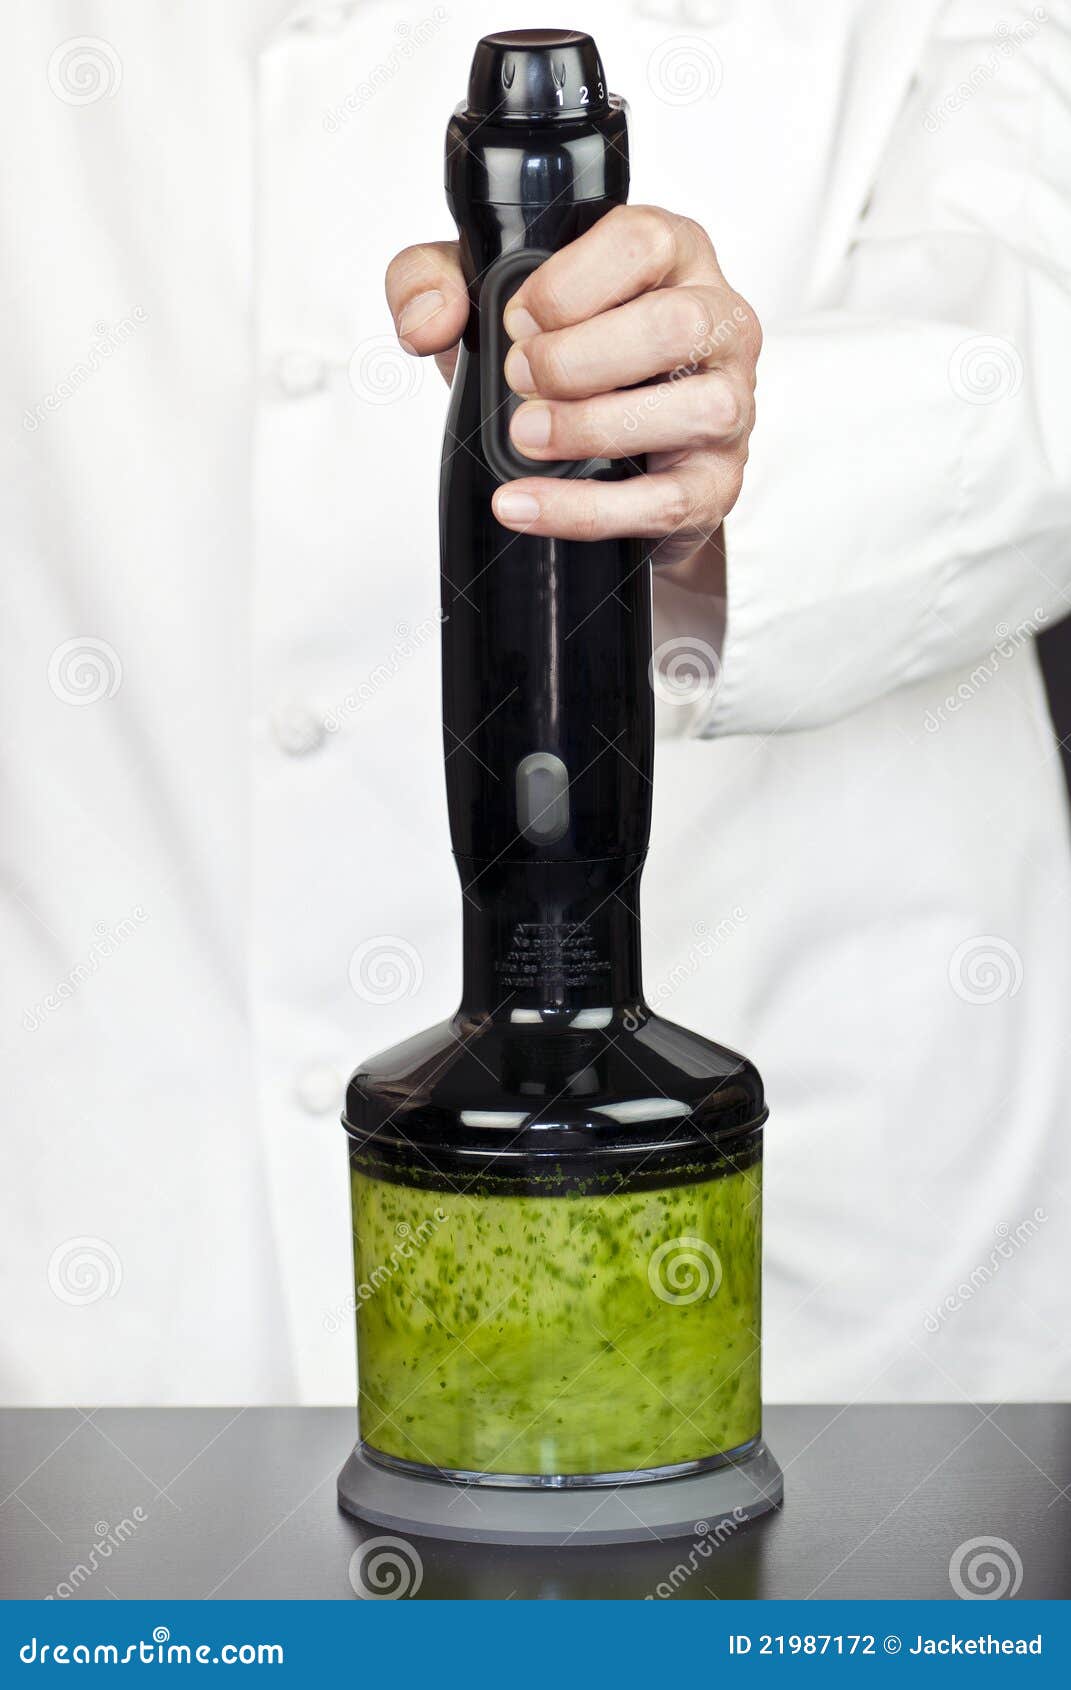 150 Blender Pesto Stock Photos Free & Royalty-Free from Dreamstime